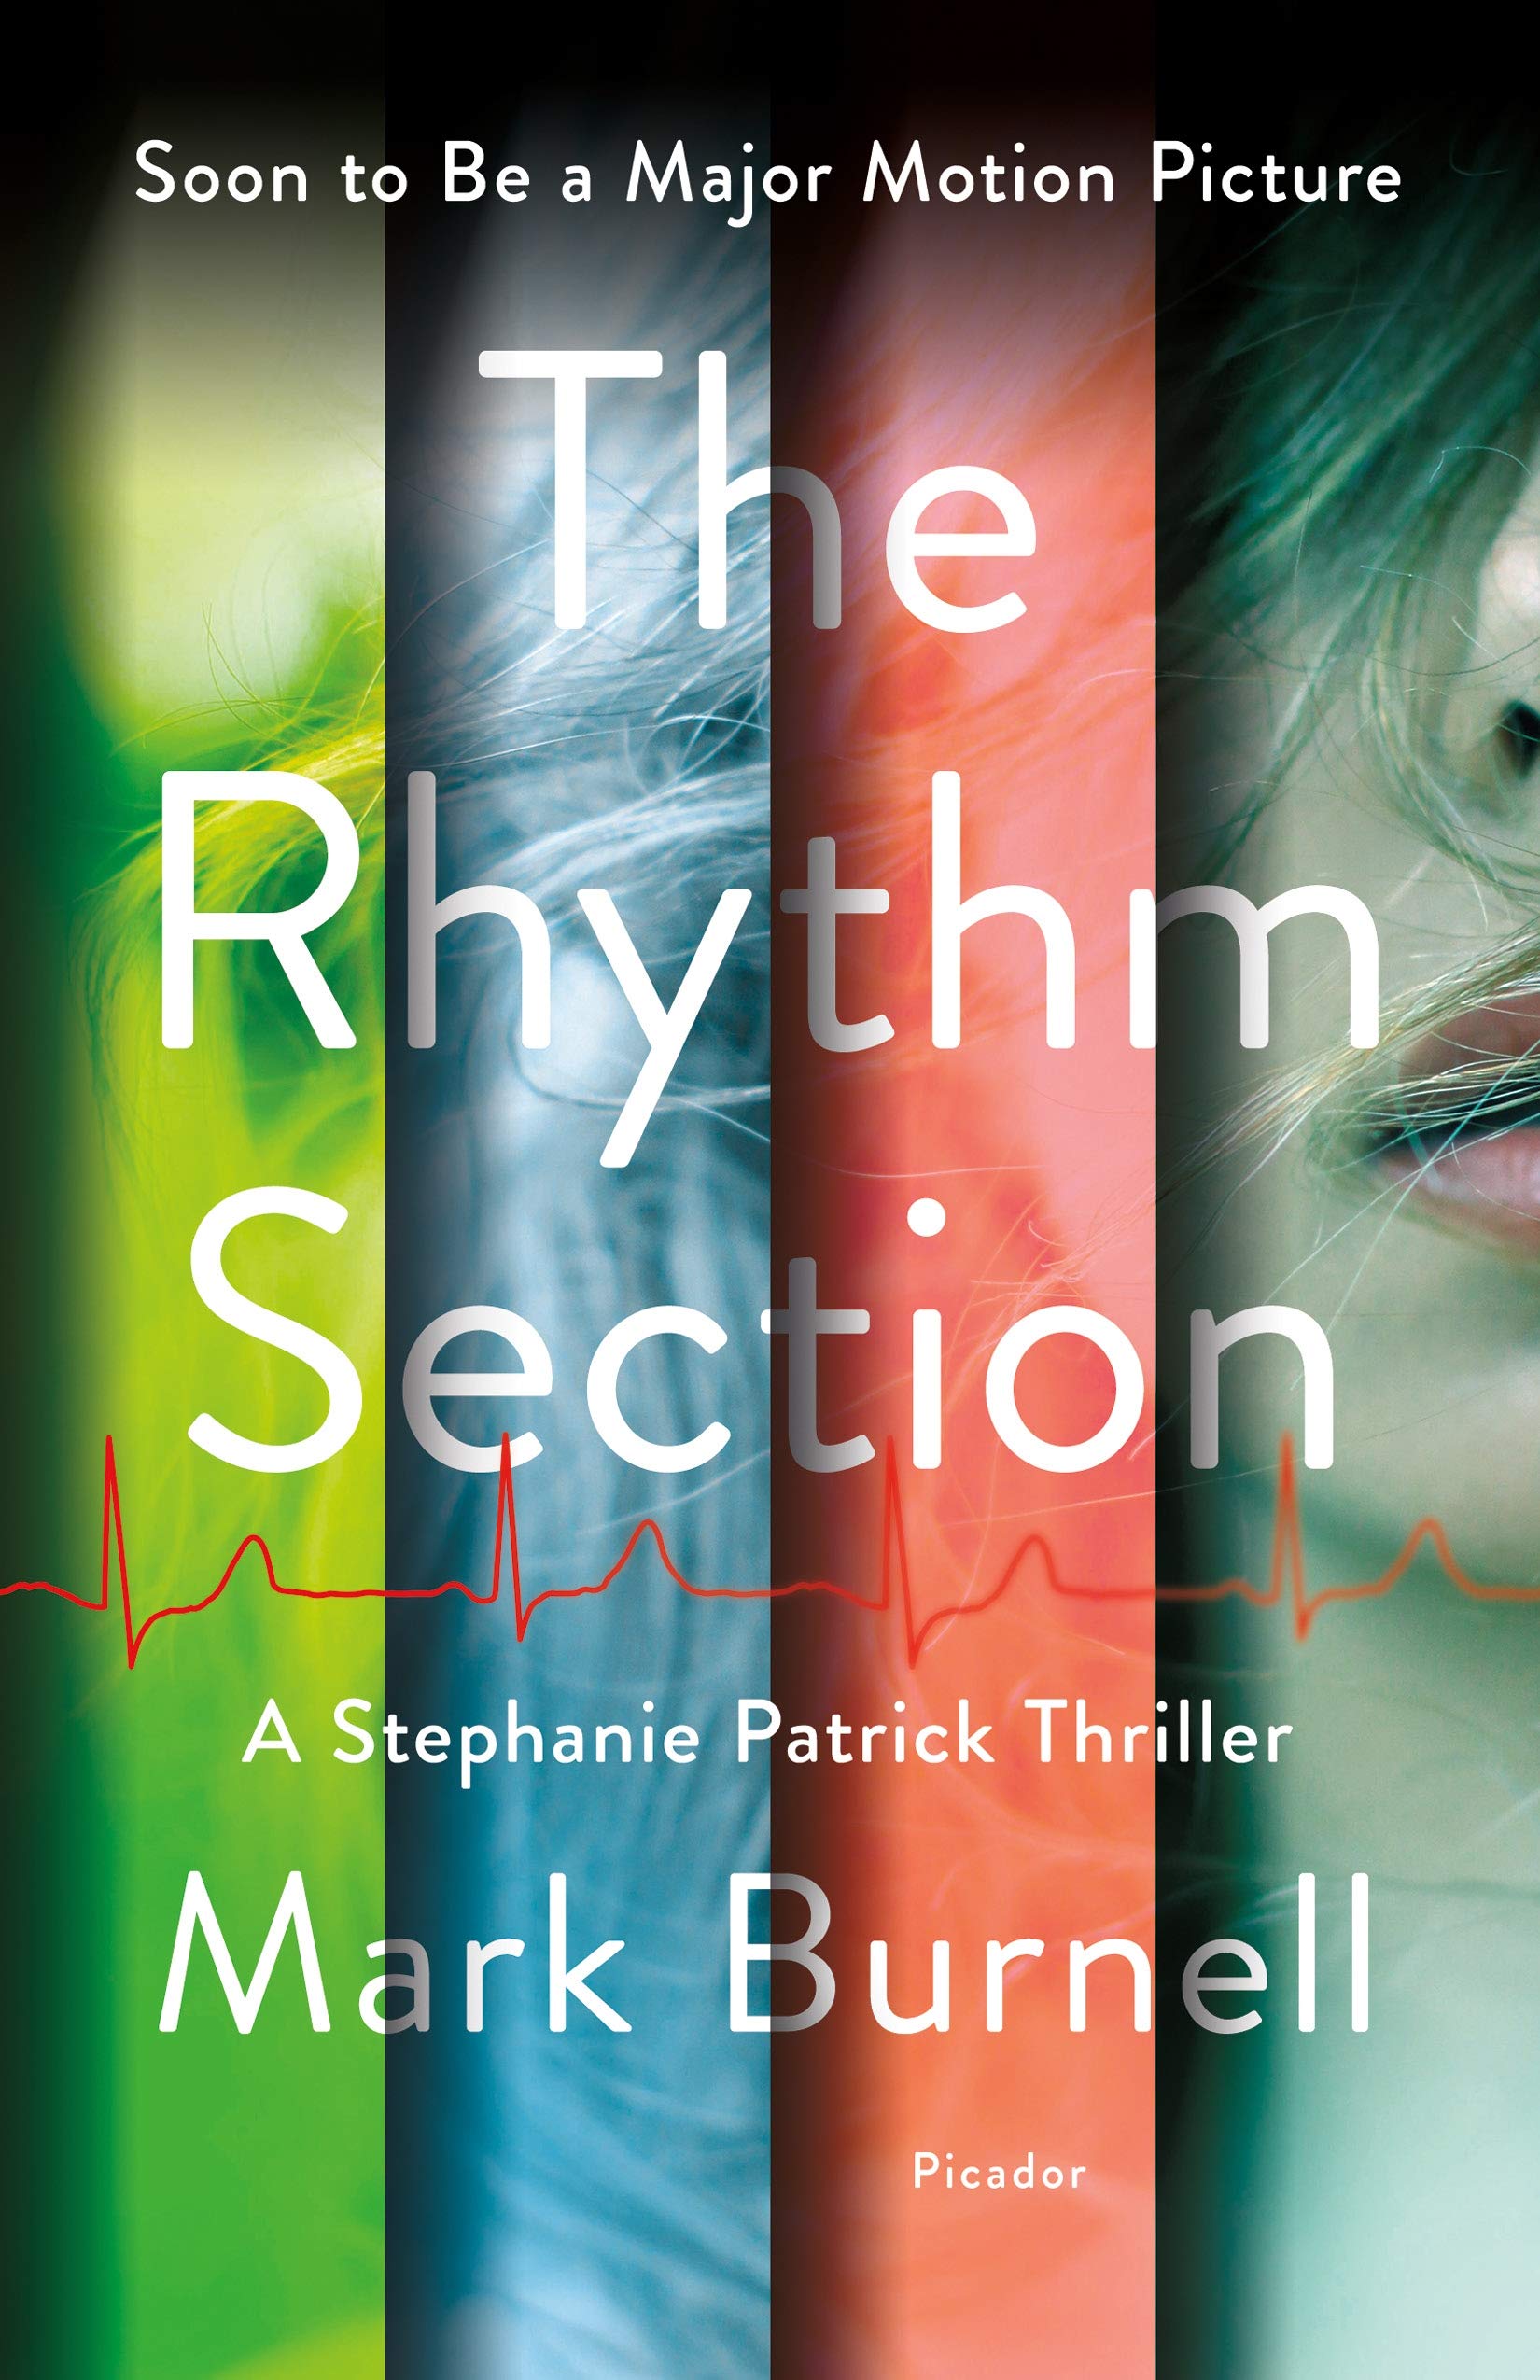 A suspenseful book cover for 'the rhythm section' by mark burnell, teasing a major motion picture adaptation with an intriguing close-up of a woman's face partially hidden by shadow, hinting at the thriller's intensity.